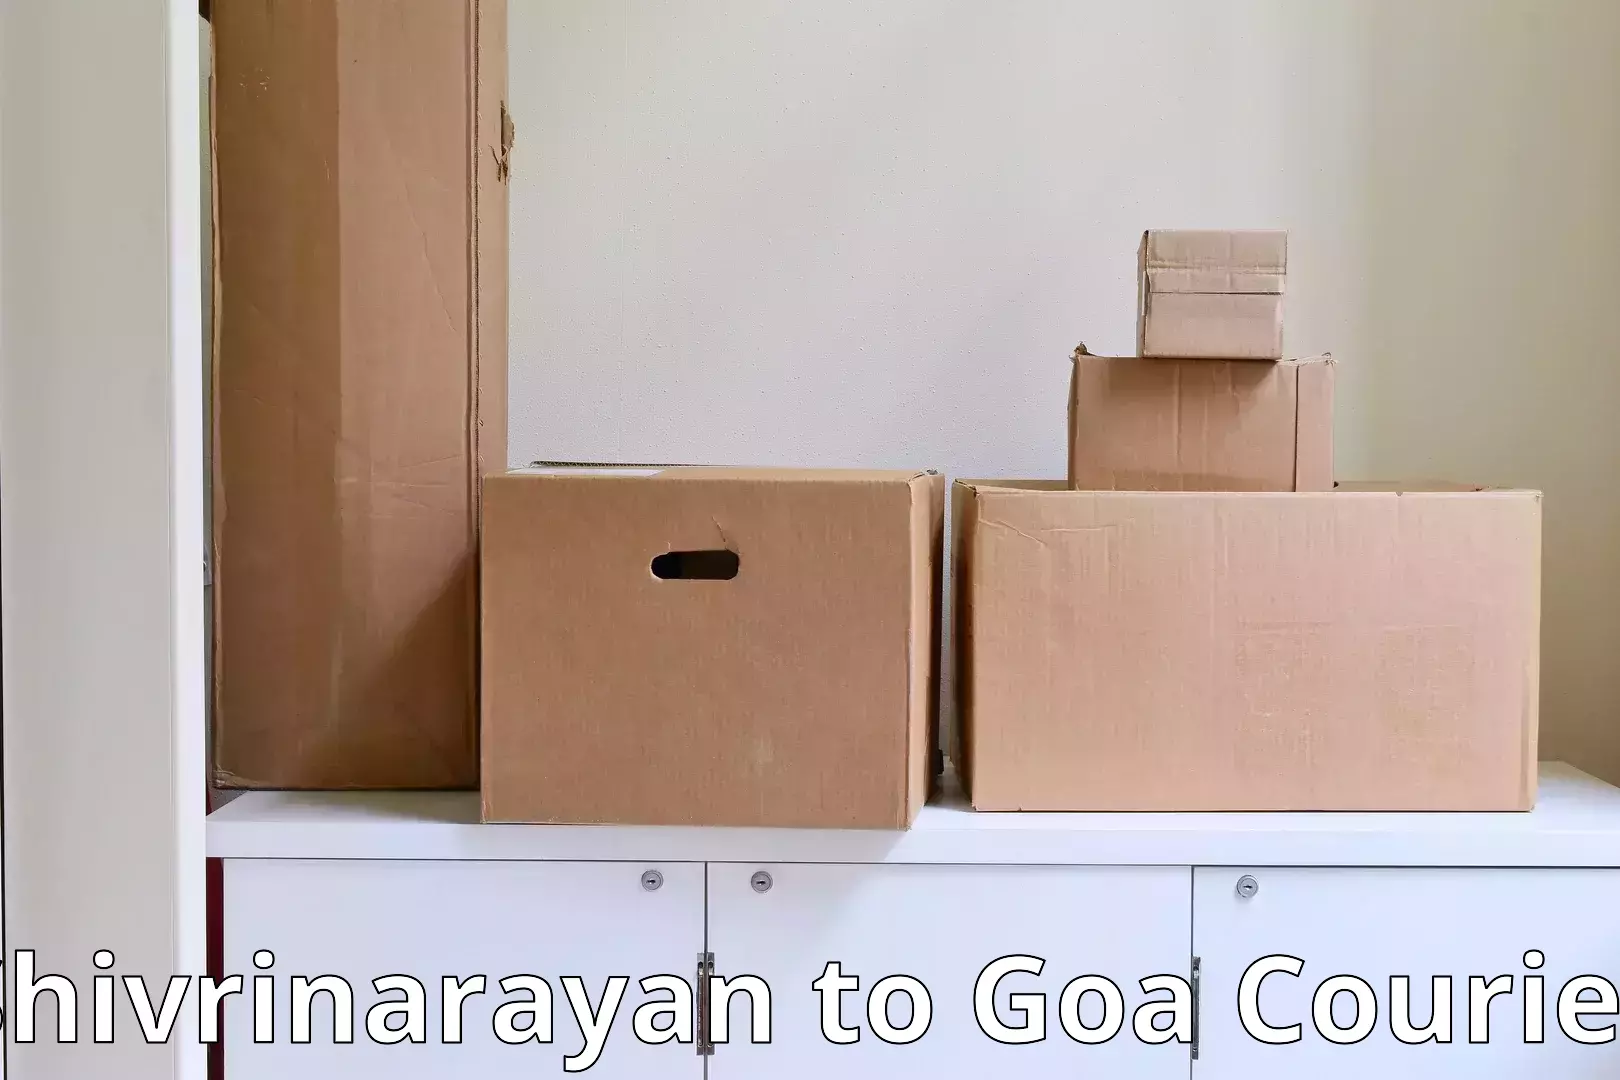 Reliable moving solutions Shivrinarayan to South Goa